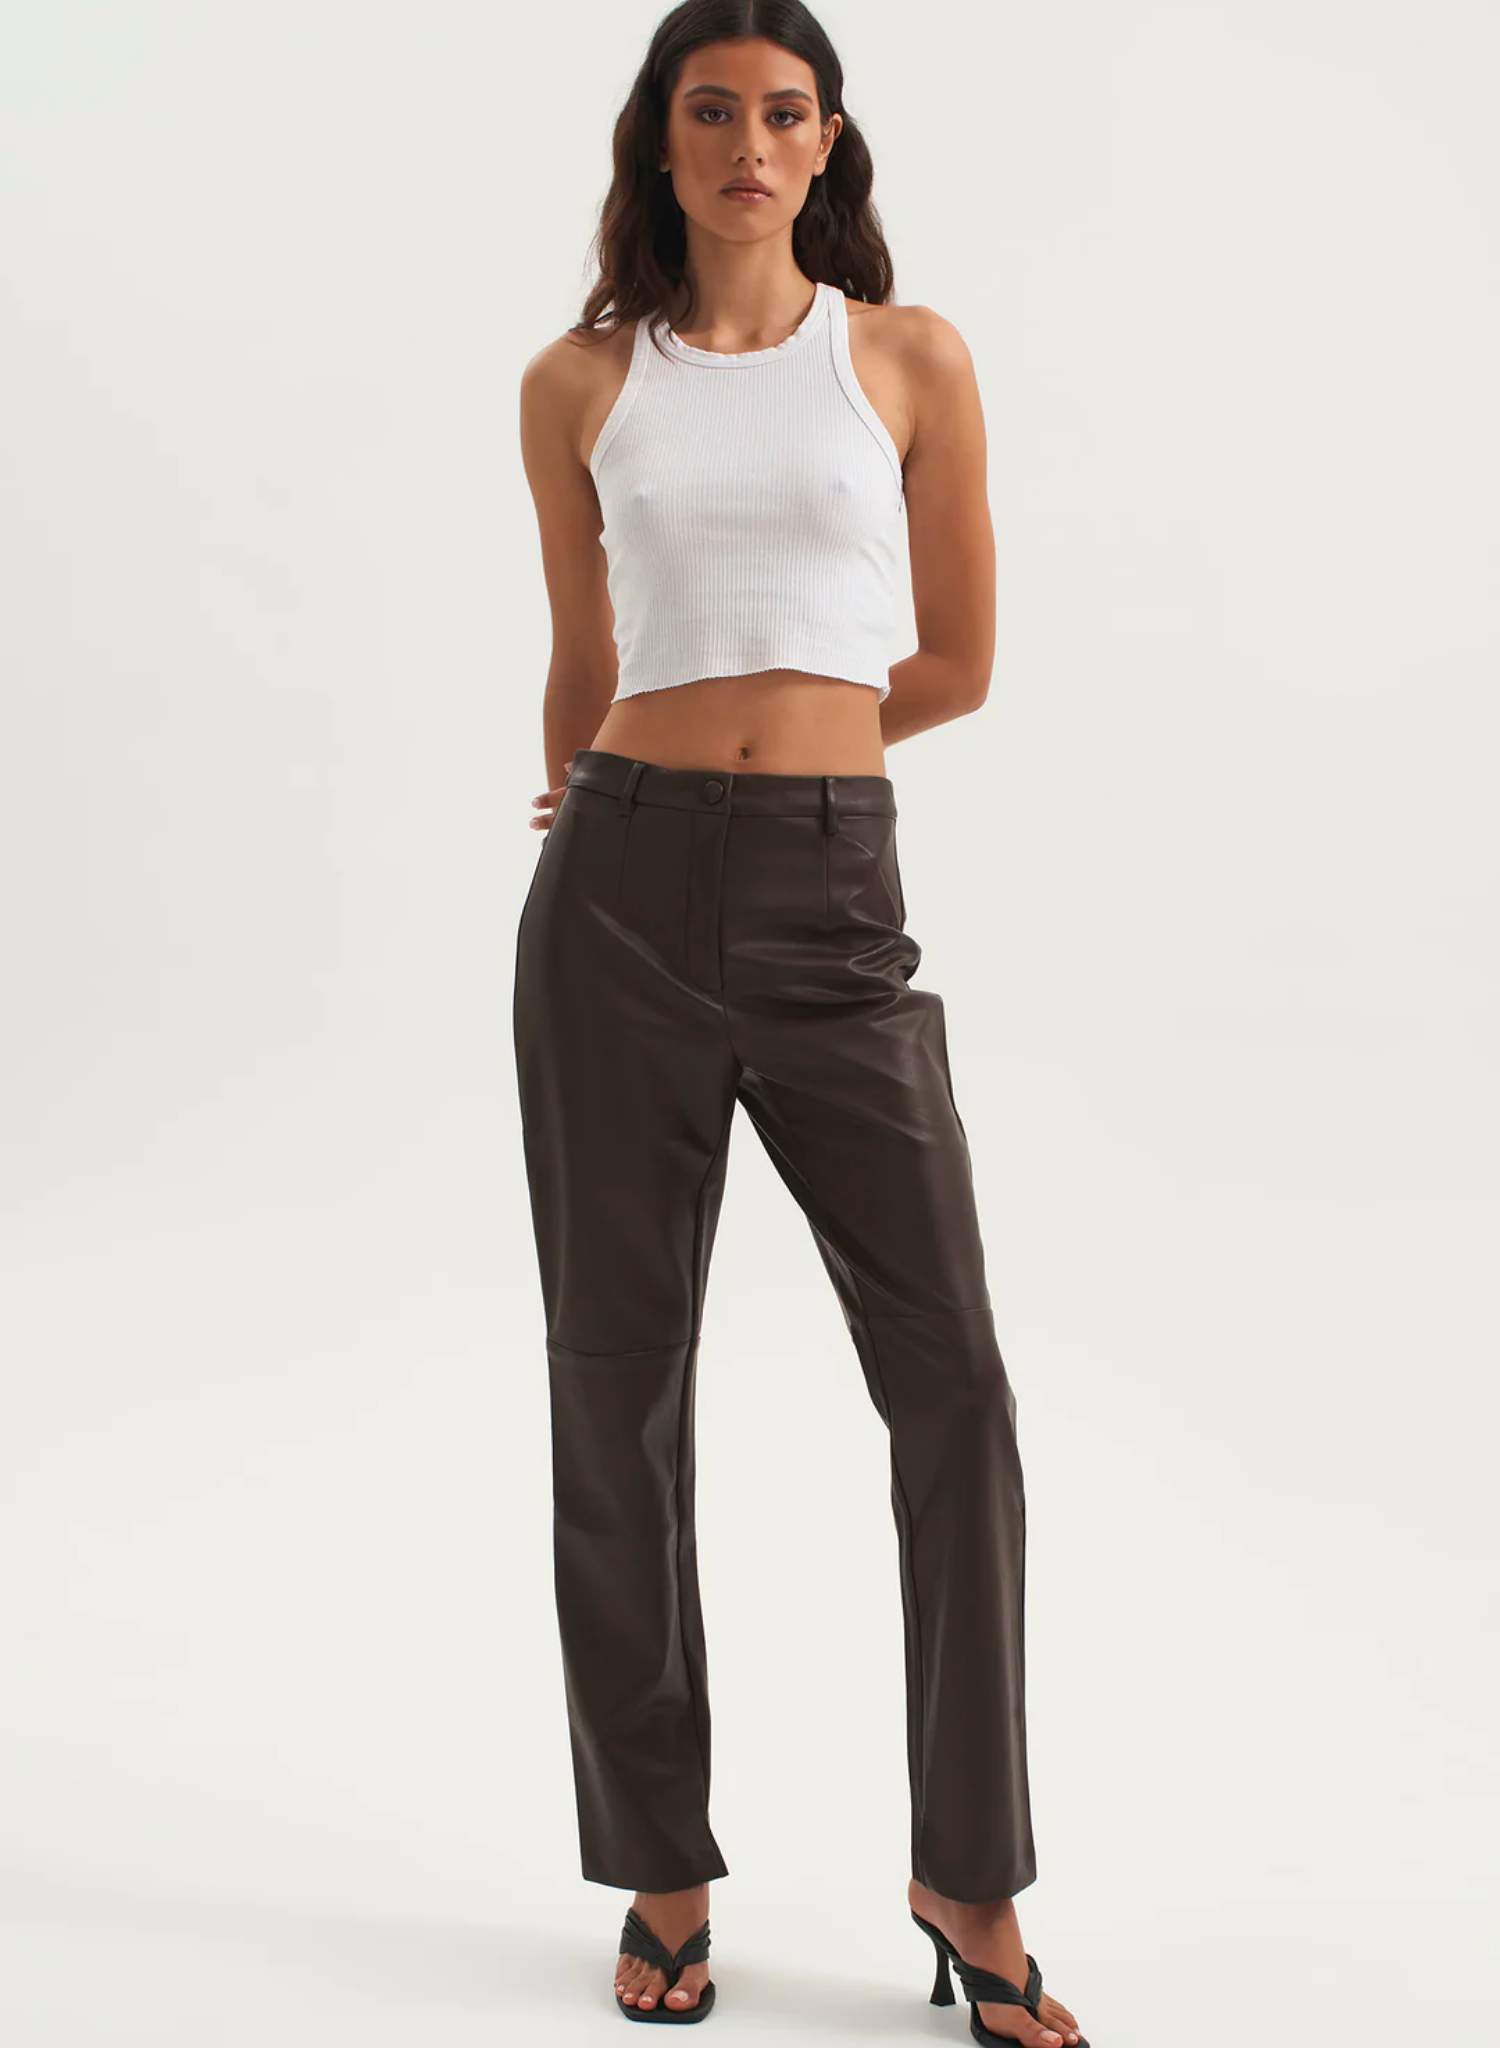 The Lexi Pant is a classic cut high waisted and cropped leg fit. The soft faux leather fabric is comfy and durable, featuring an above knee seam that ensures they bend and stretch as you do. This is the perfect new staple for your wardrobe.